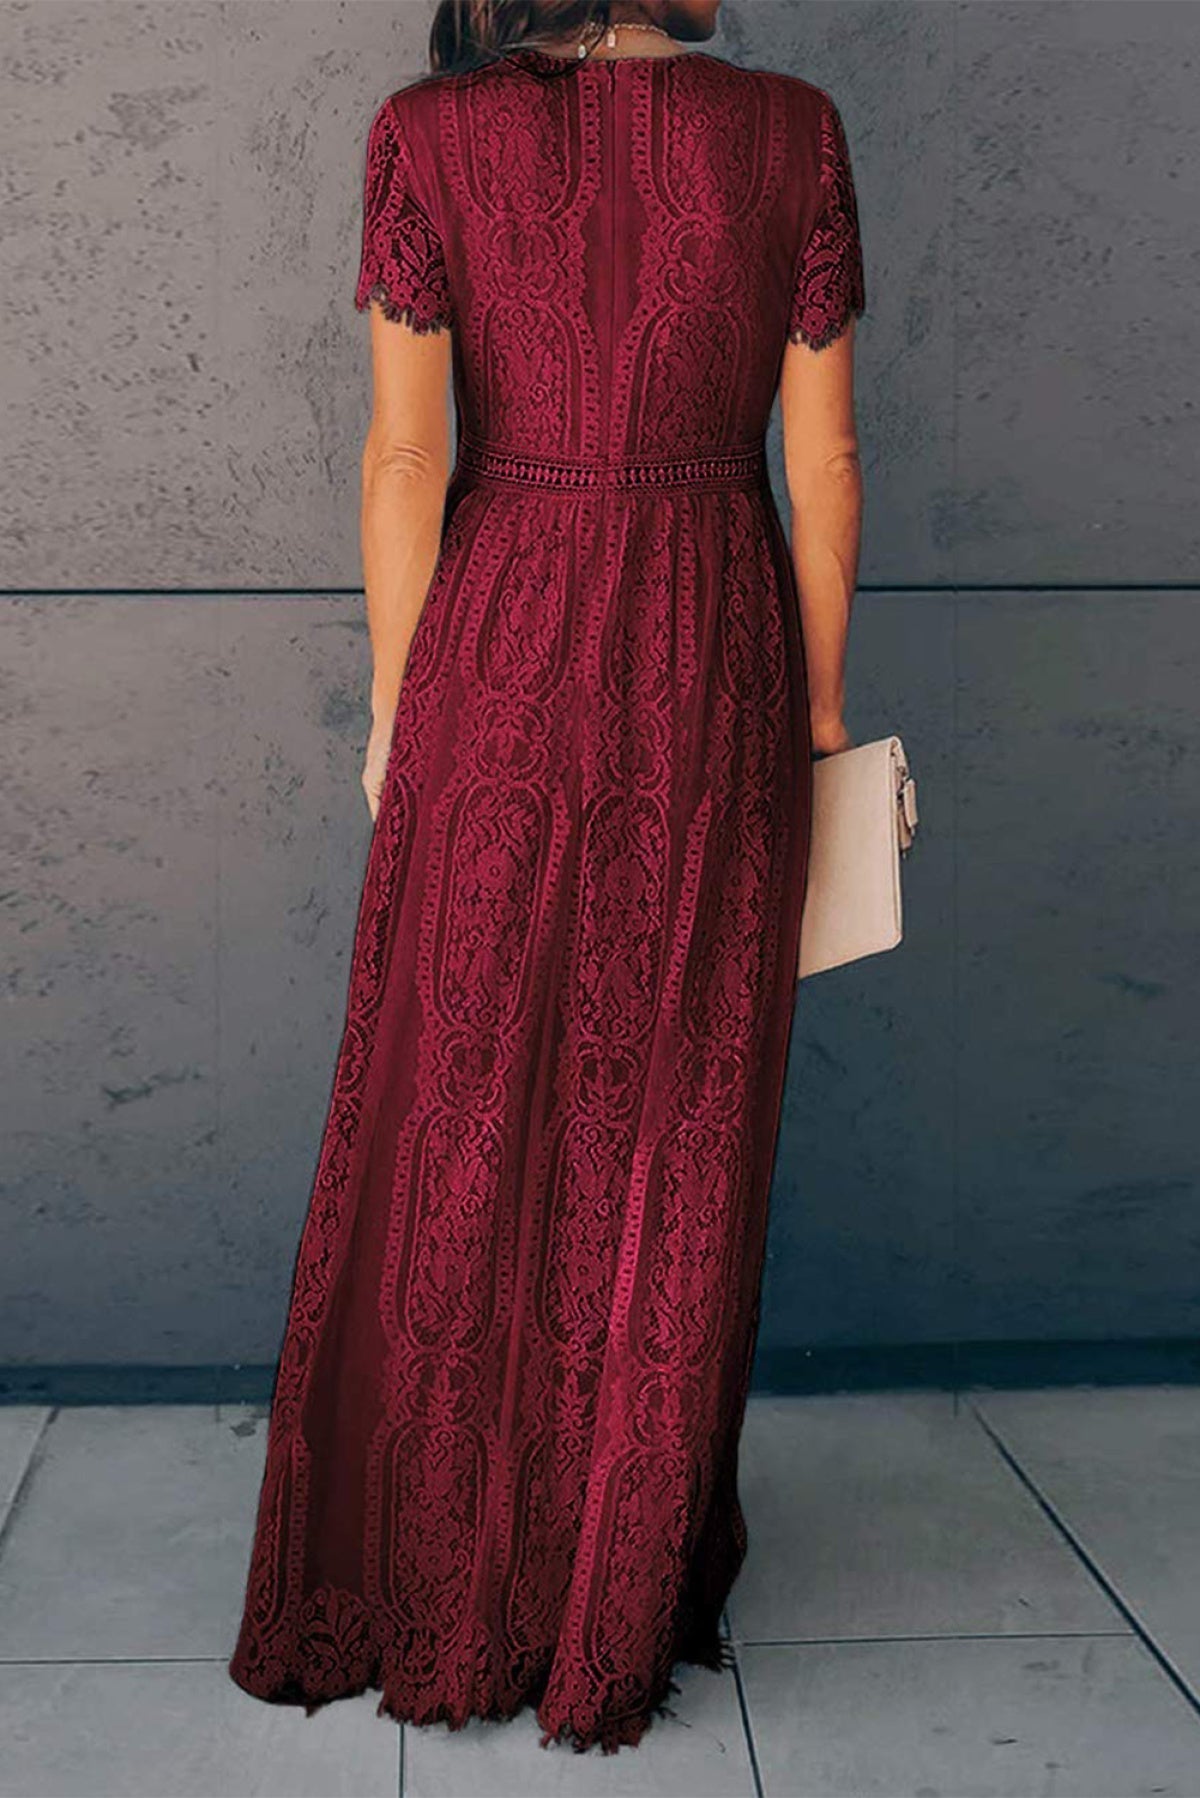 Fill Your Heart Lace Maxi Dress